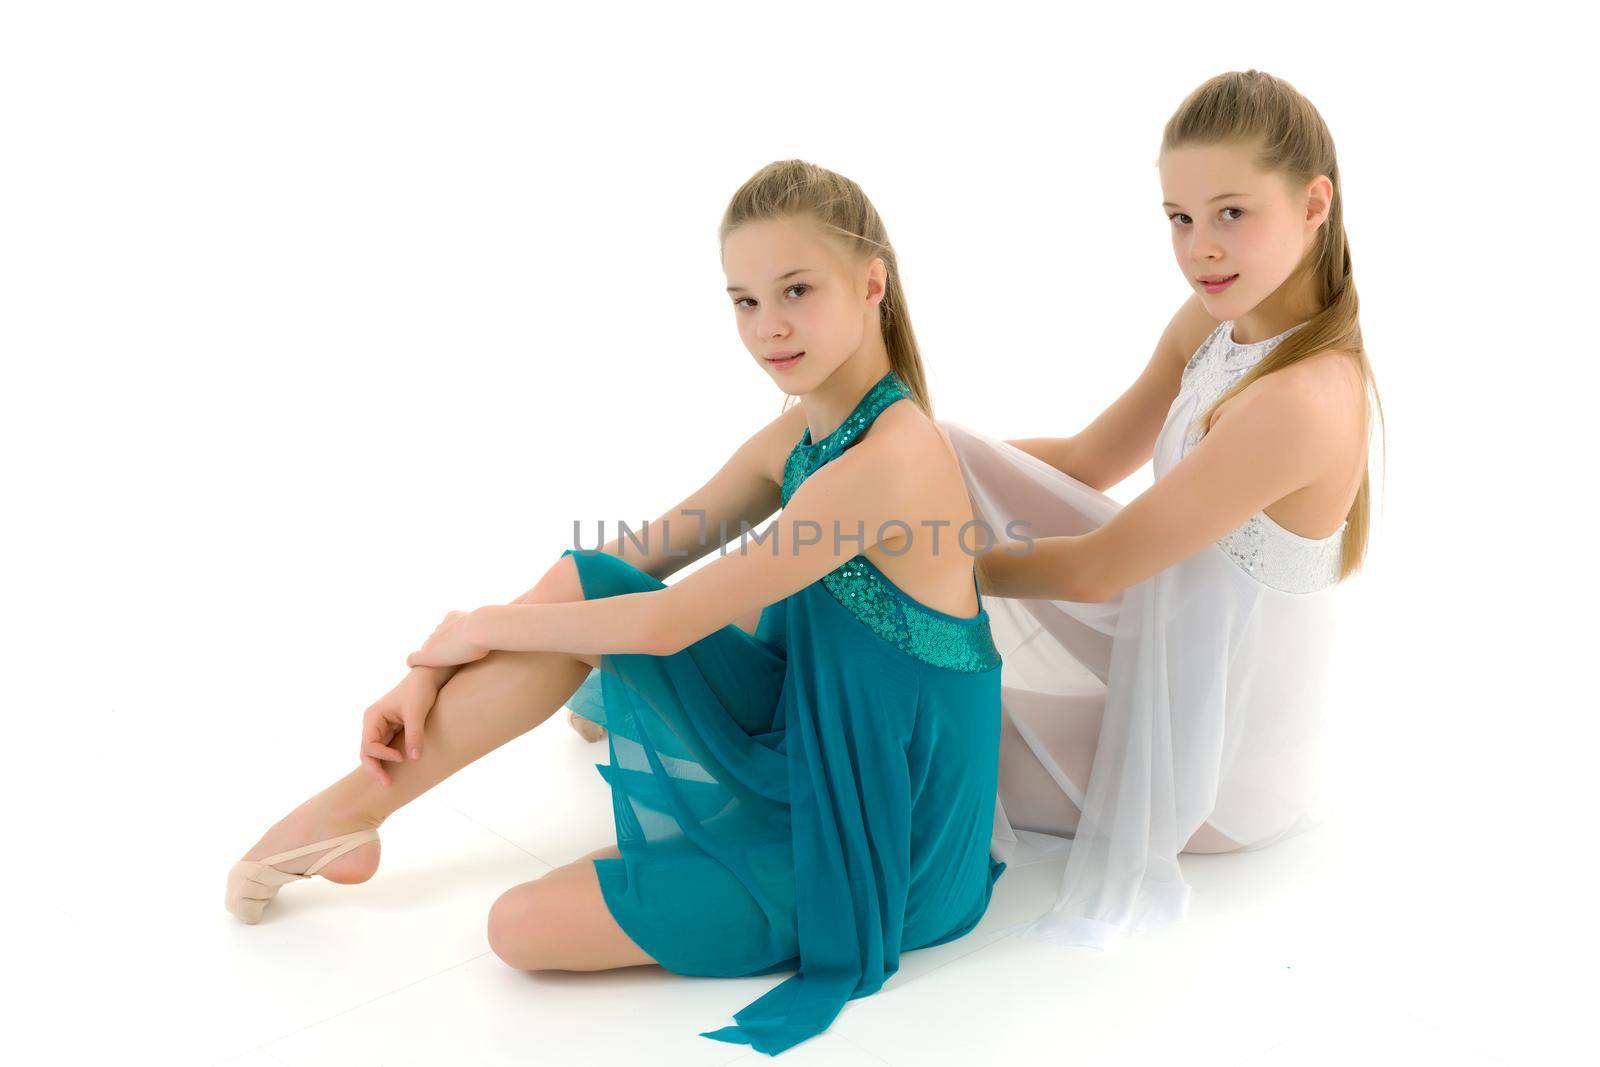 Beautiful Teenage Girls in White and Blue Sport Dresses Sitting on the Floor Against White Background in Studio, Portrait of Two Pretty Twin Sisters Posing Together